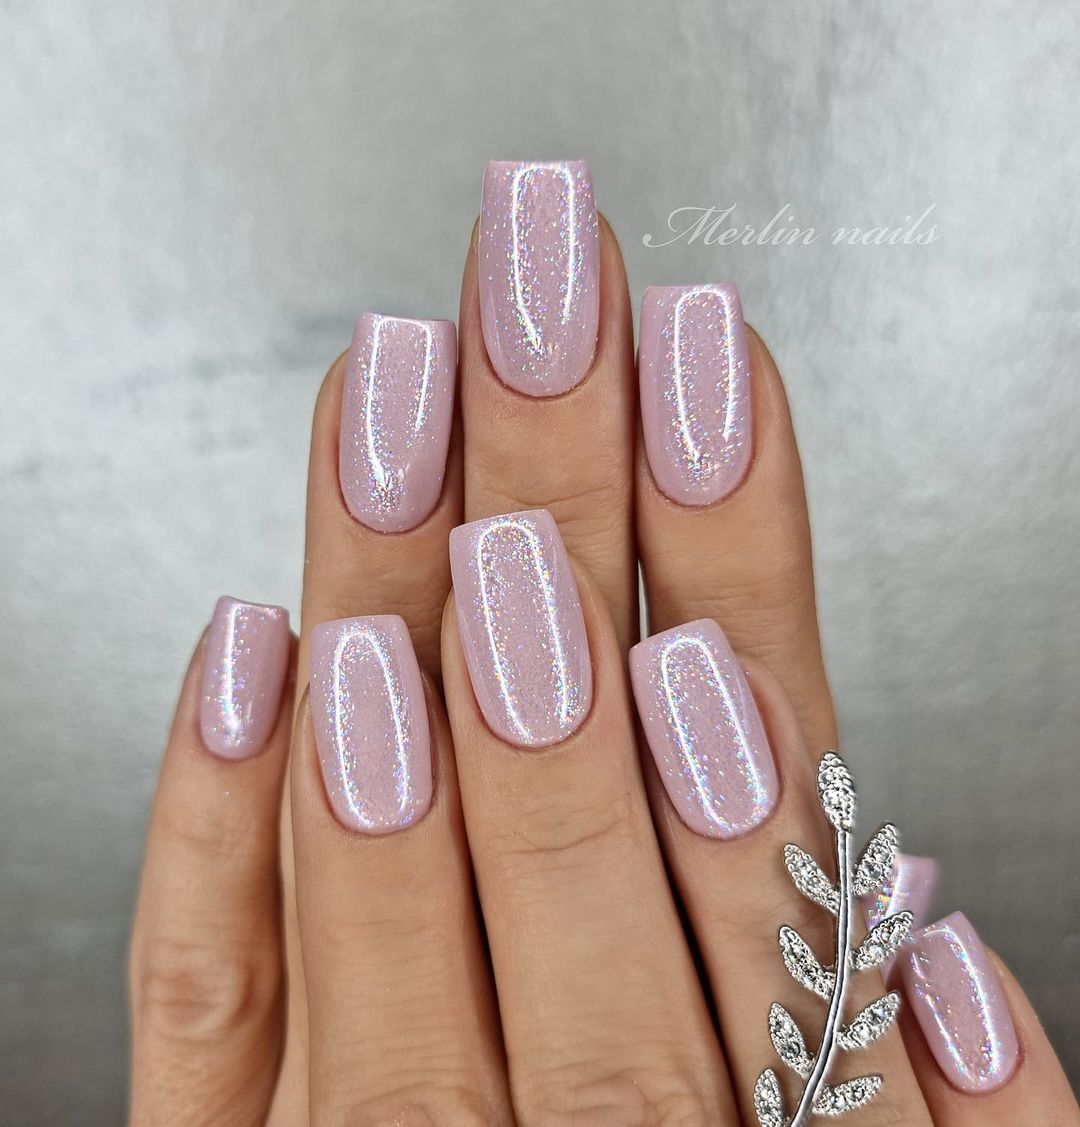 Nude Nails With Glitter